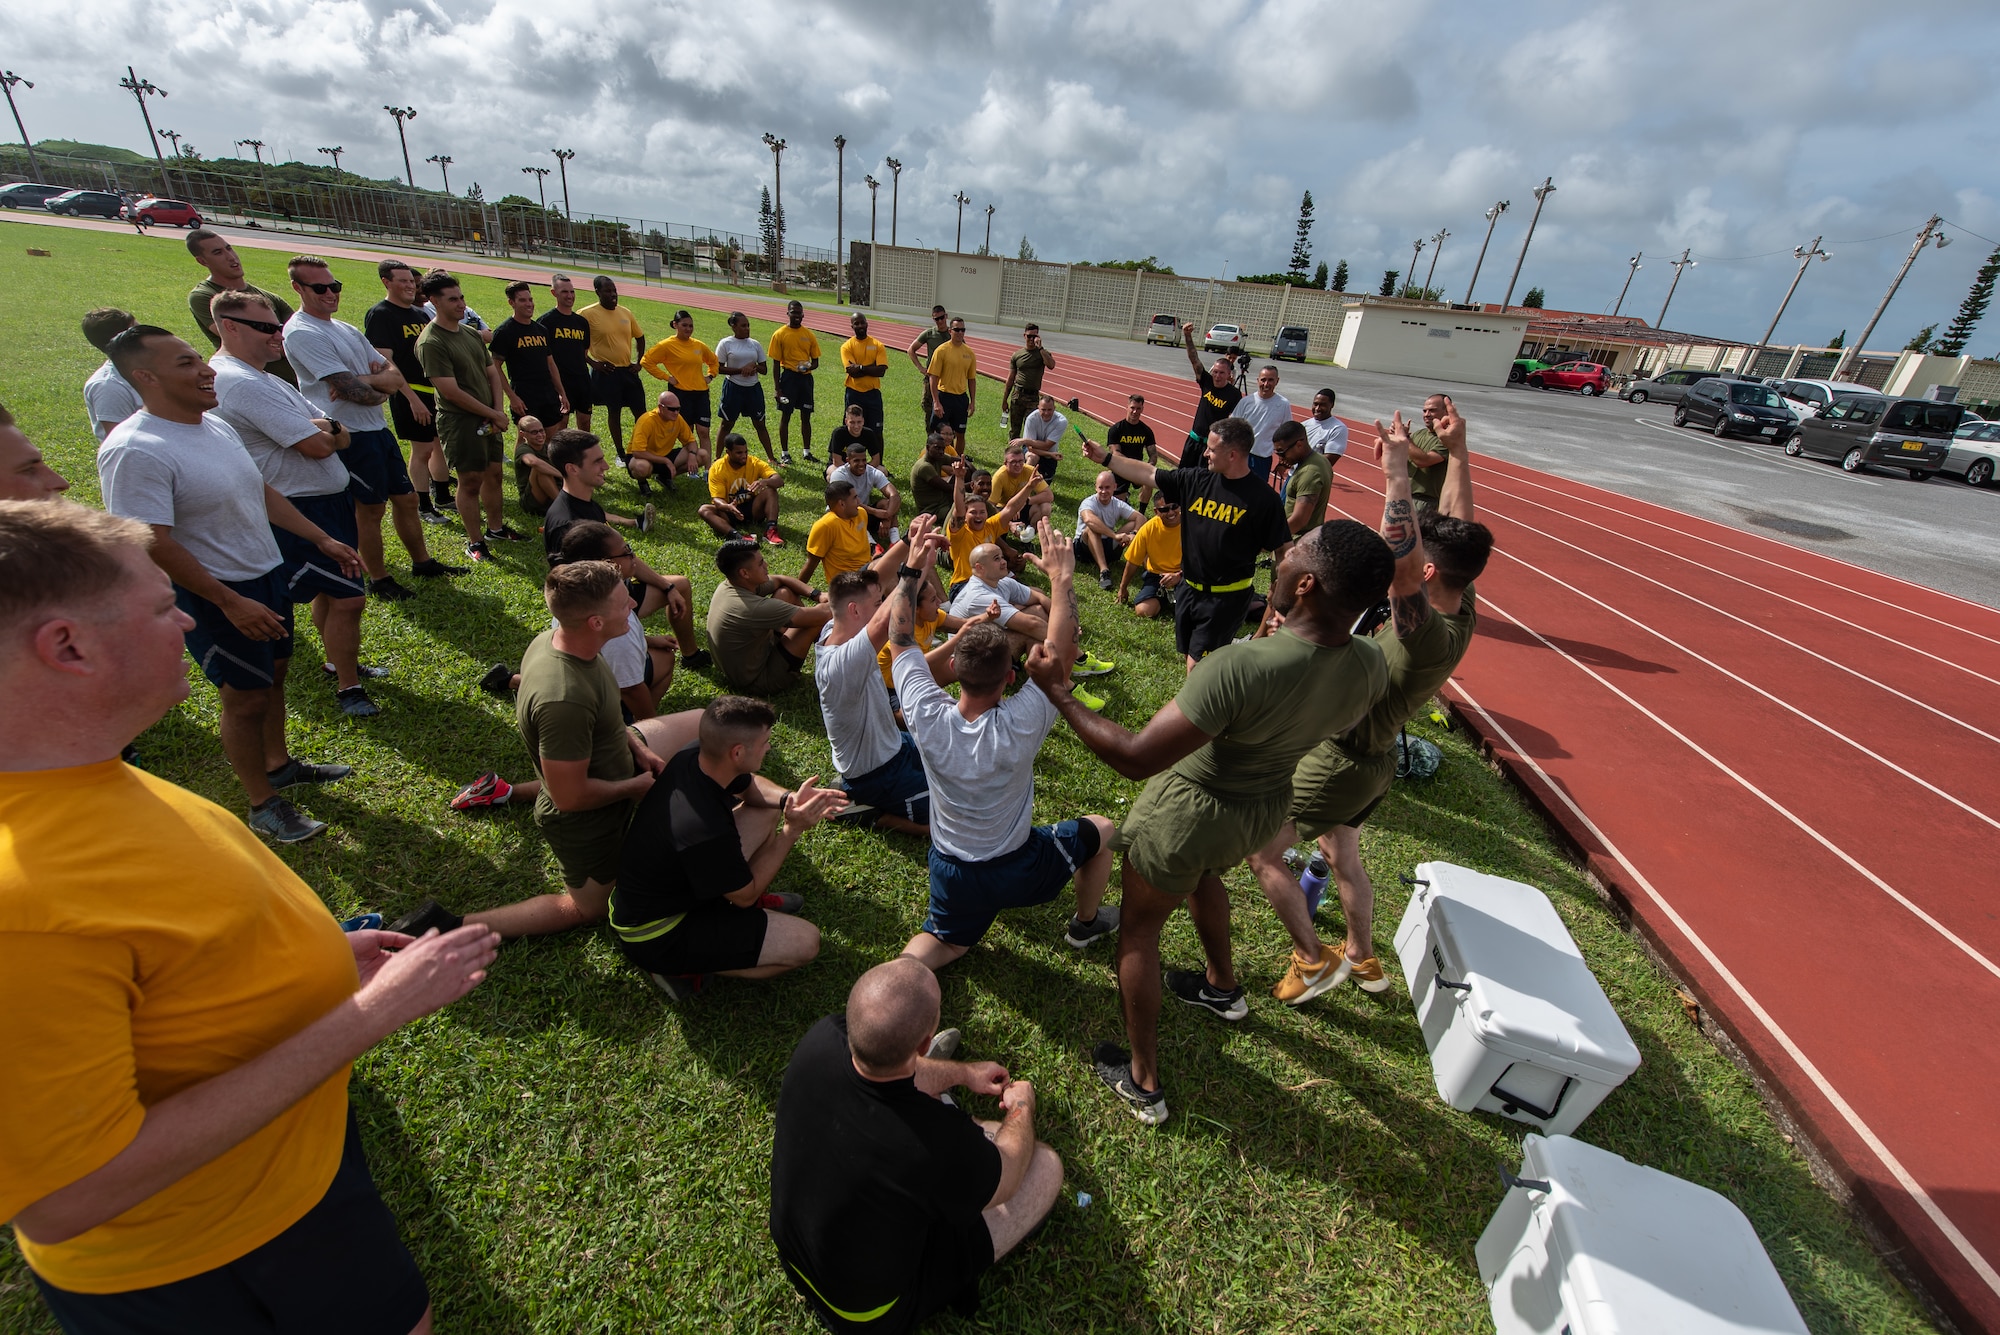 Members of the Green Team celebrate after being announced the winner of the Okinawa Joint Fitness Challenge Sept. 26, 2018, at Kadena Air Base, Japan. The OJFC was designed to mimic obstacles and challenges faced in the battlefield such as sprinting, running ammunition cans, transporting wounded personnel to safety and tossing simulated grenades. Each team competed for the best time, however the final challenge brought all four teams together. (U.S. Air Force photo by Staff Sgt. Micaiah Anthony)